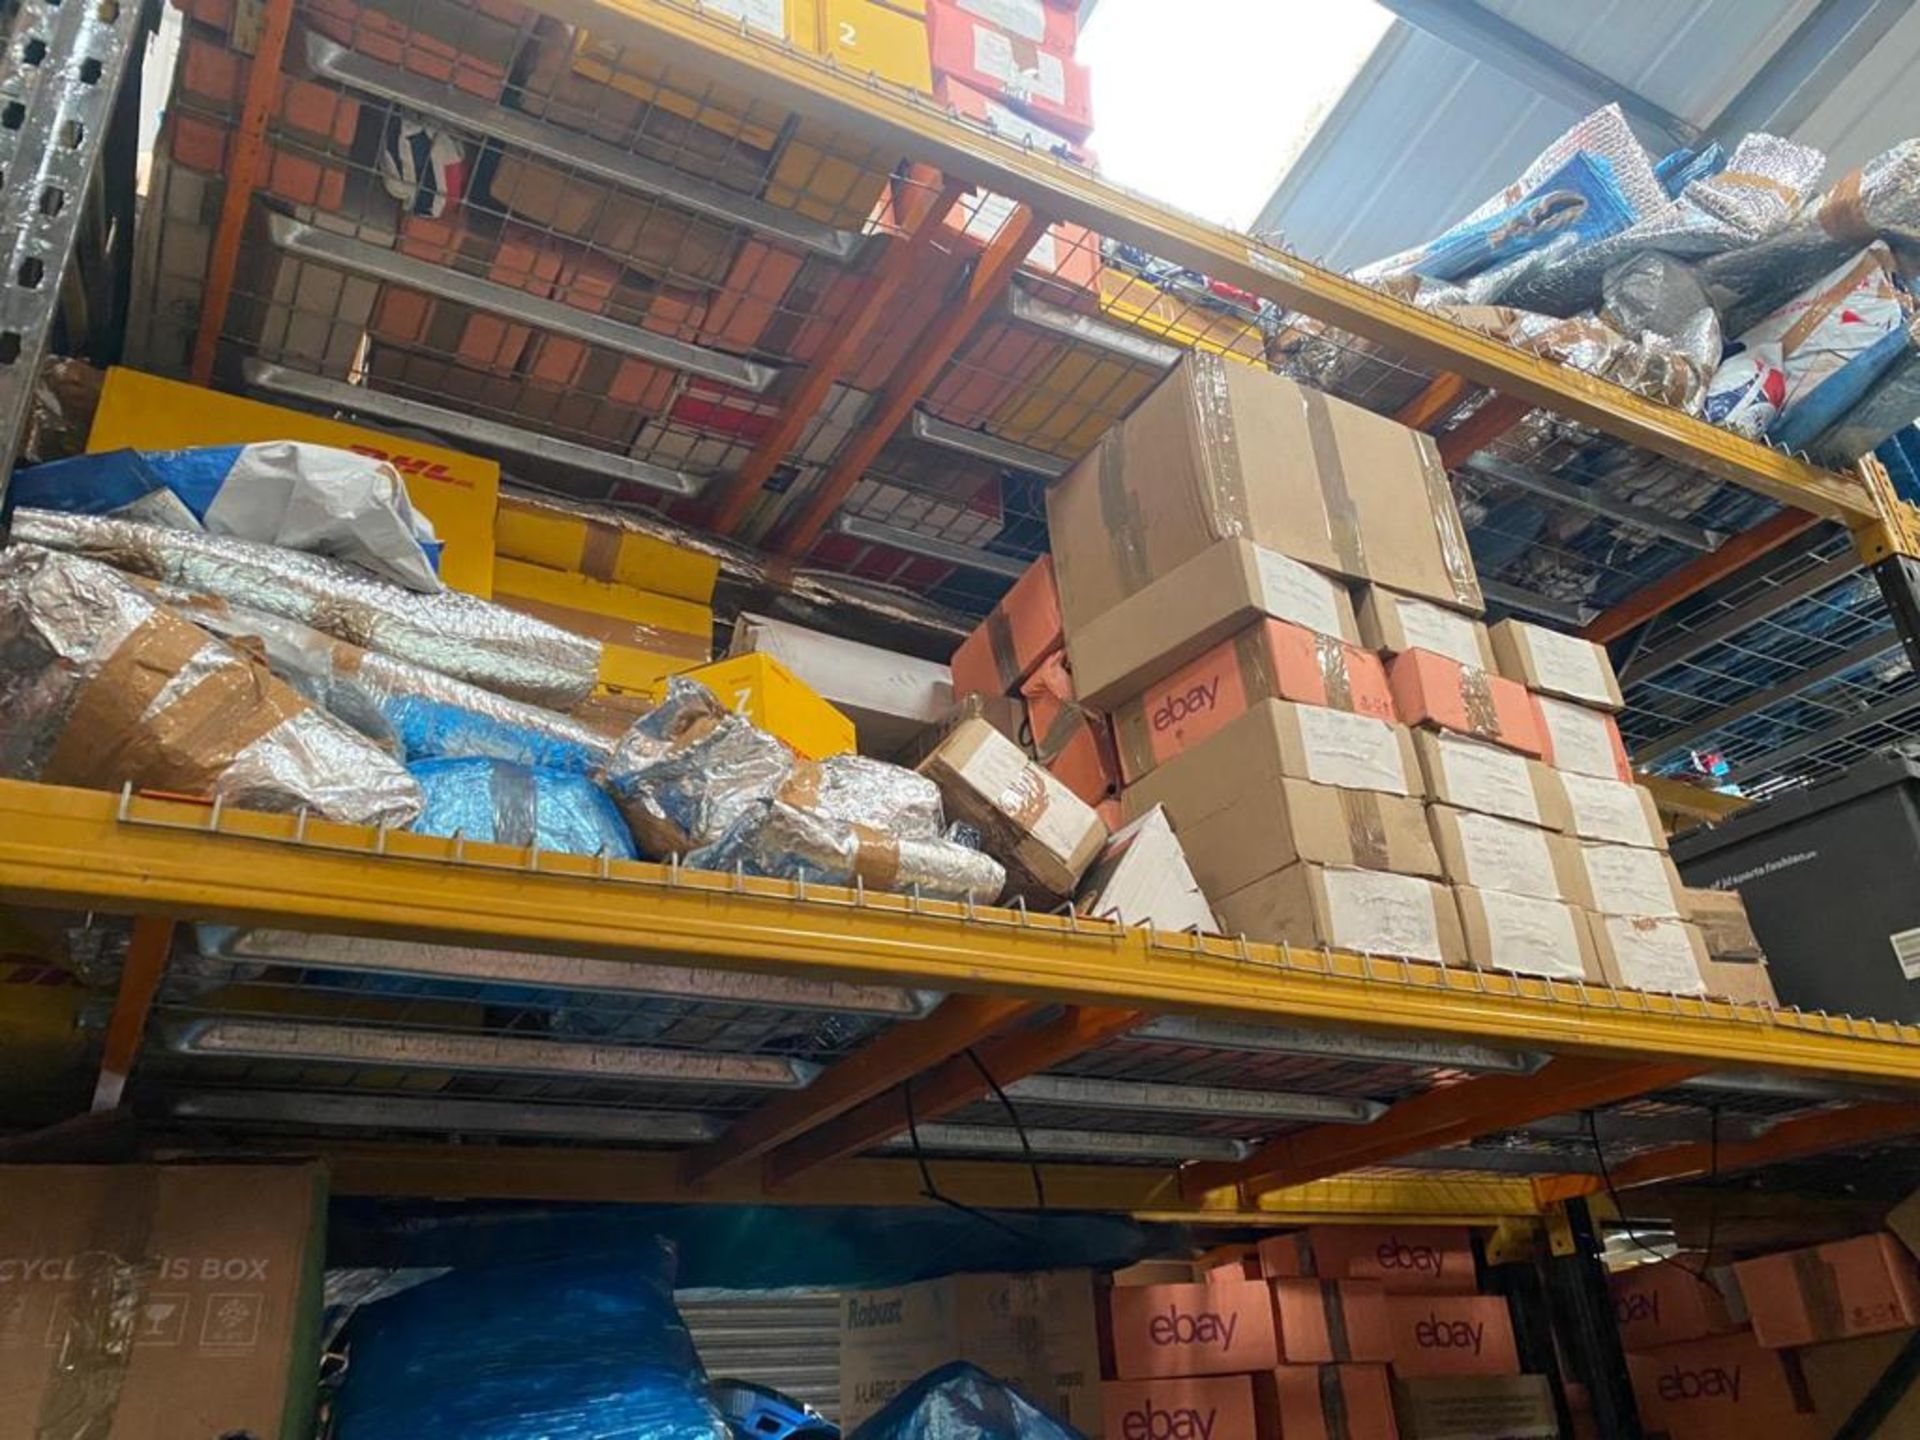 BULK ITEMS JOB LOT OF USED CAR PARTS - £350K ONGOING BUSINESS STOCK CLEARANCE FOR SALE! *NO VAT* - Image 58 of 95